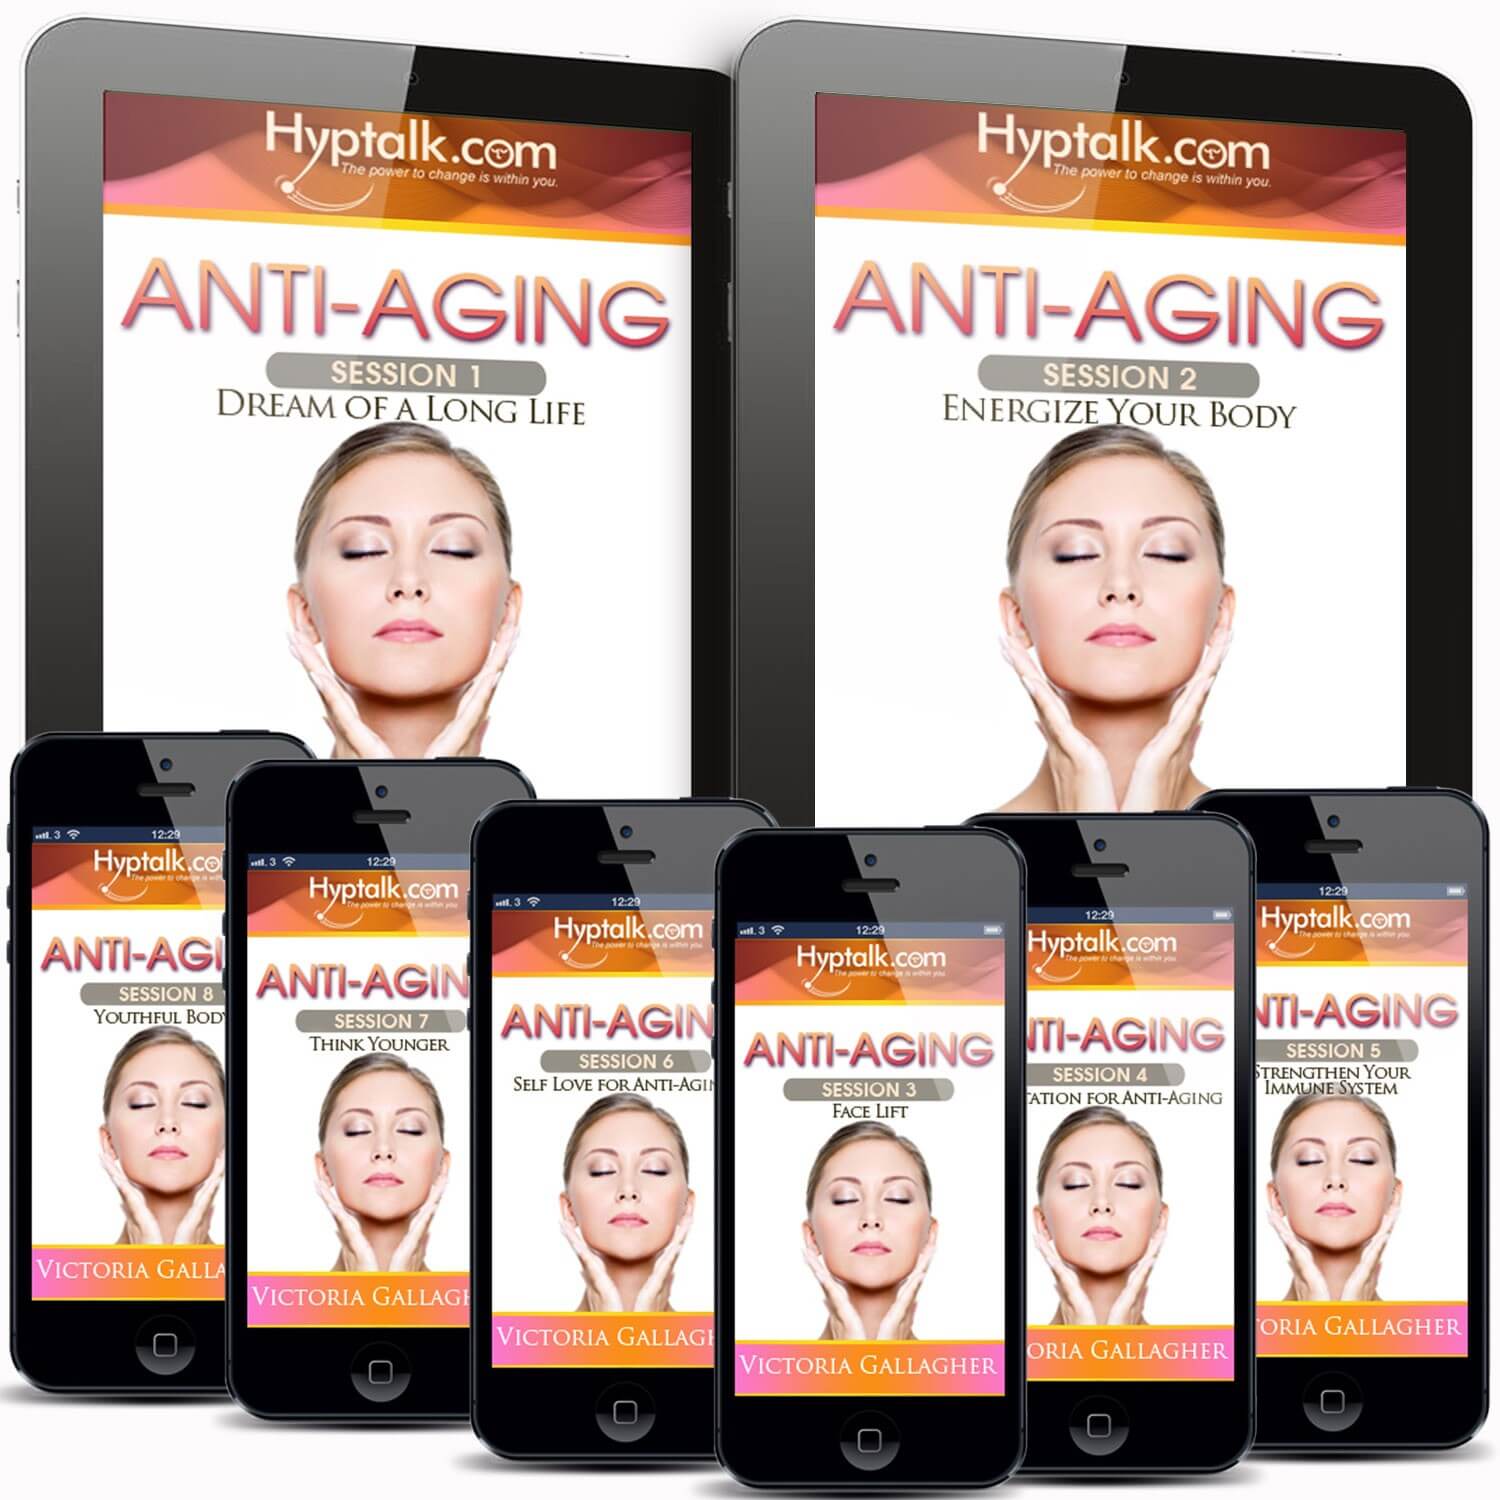 Victoria-Gallagher-Anti-Aging-Hypnosis1